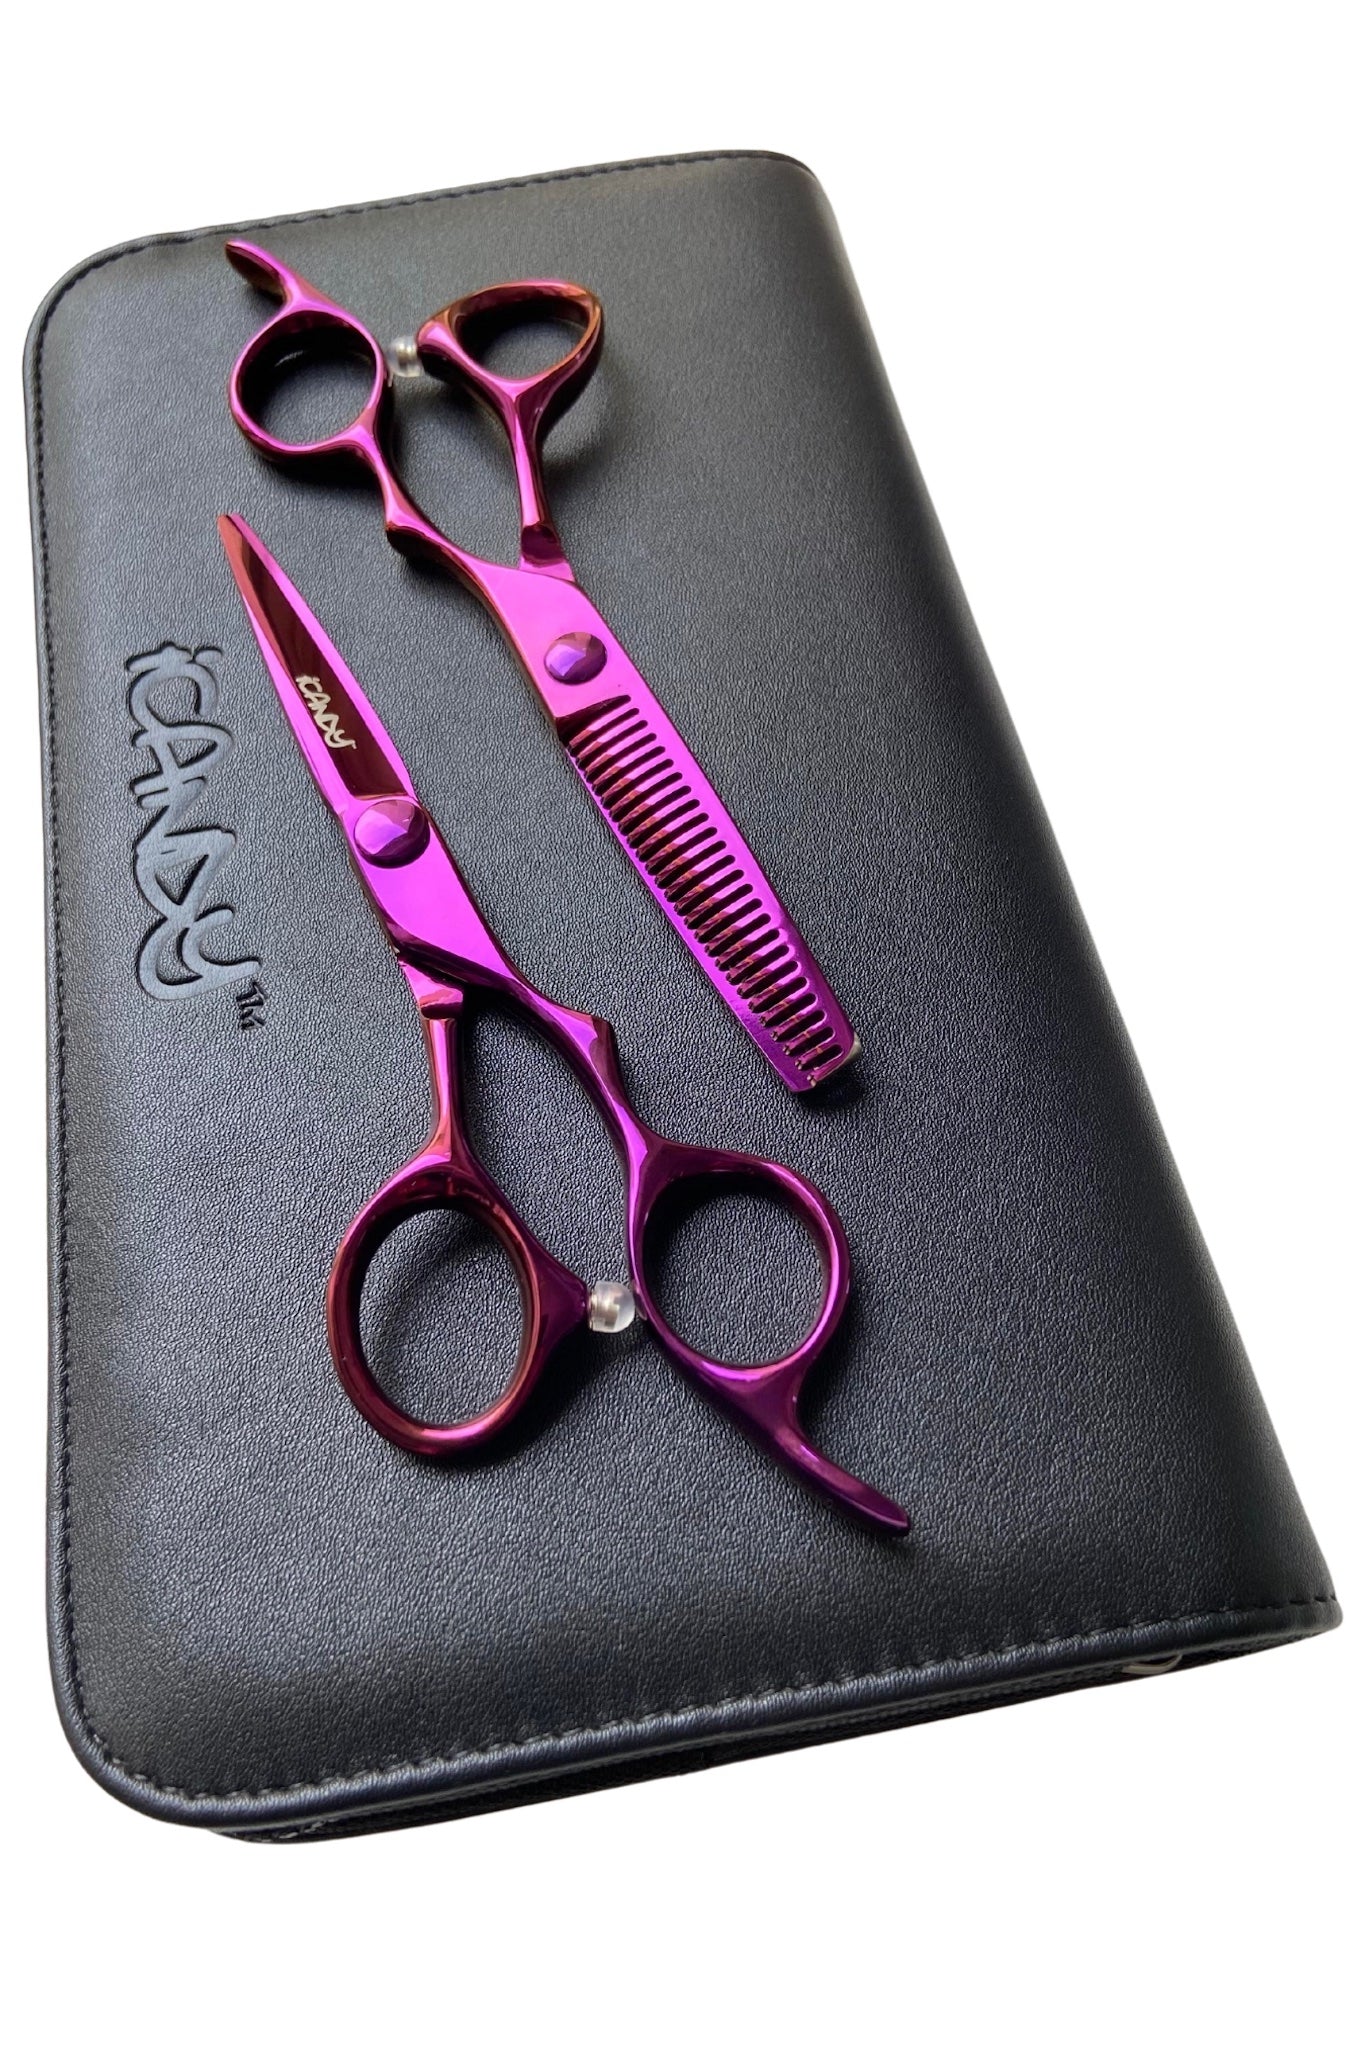 iCandy ELECTRO ULTRA Pink VG10 Scissors Bundle (5.5inch)